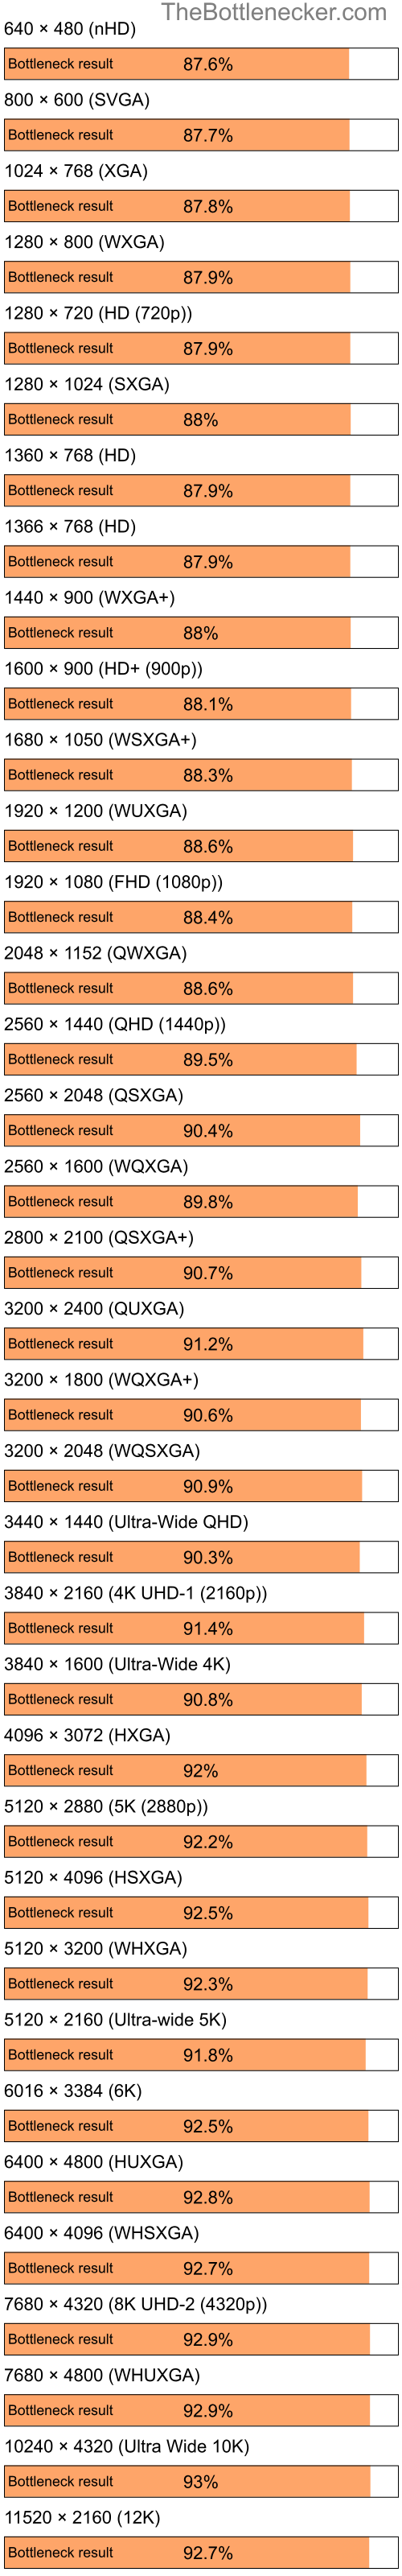 Bottleneck results by resolution for Intel Celeron and NVIDIA MX 400 in Processor Intense Tasks